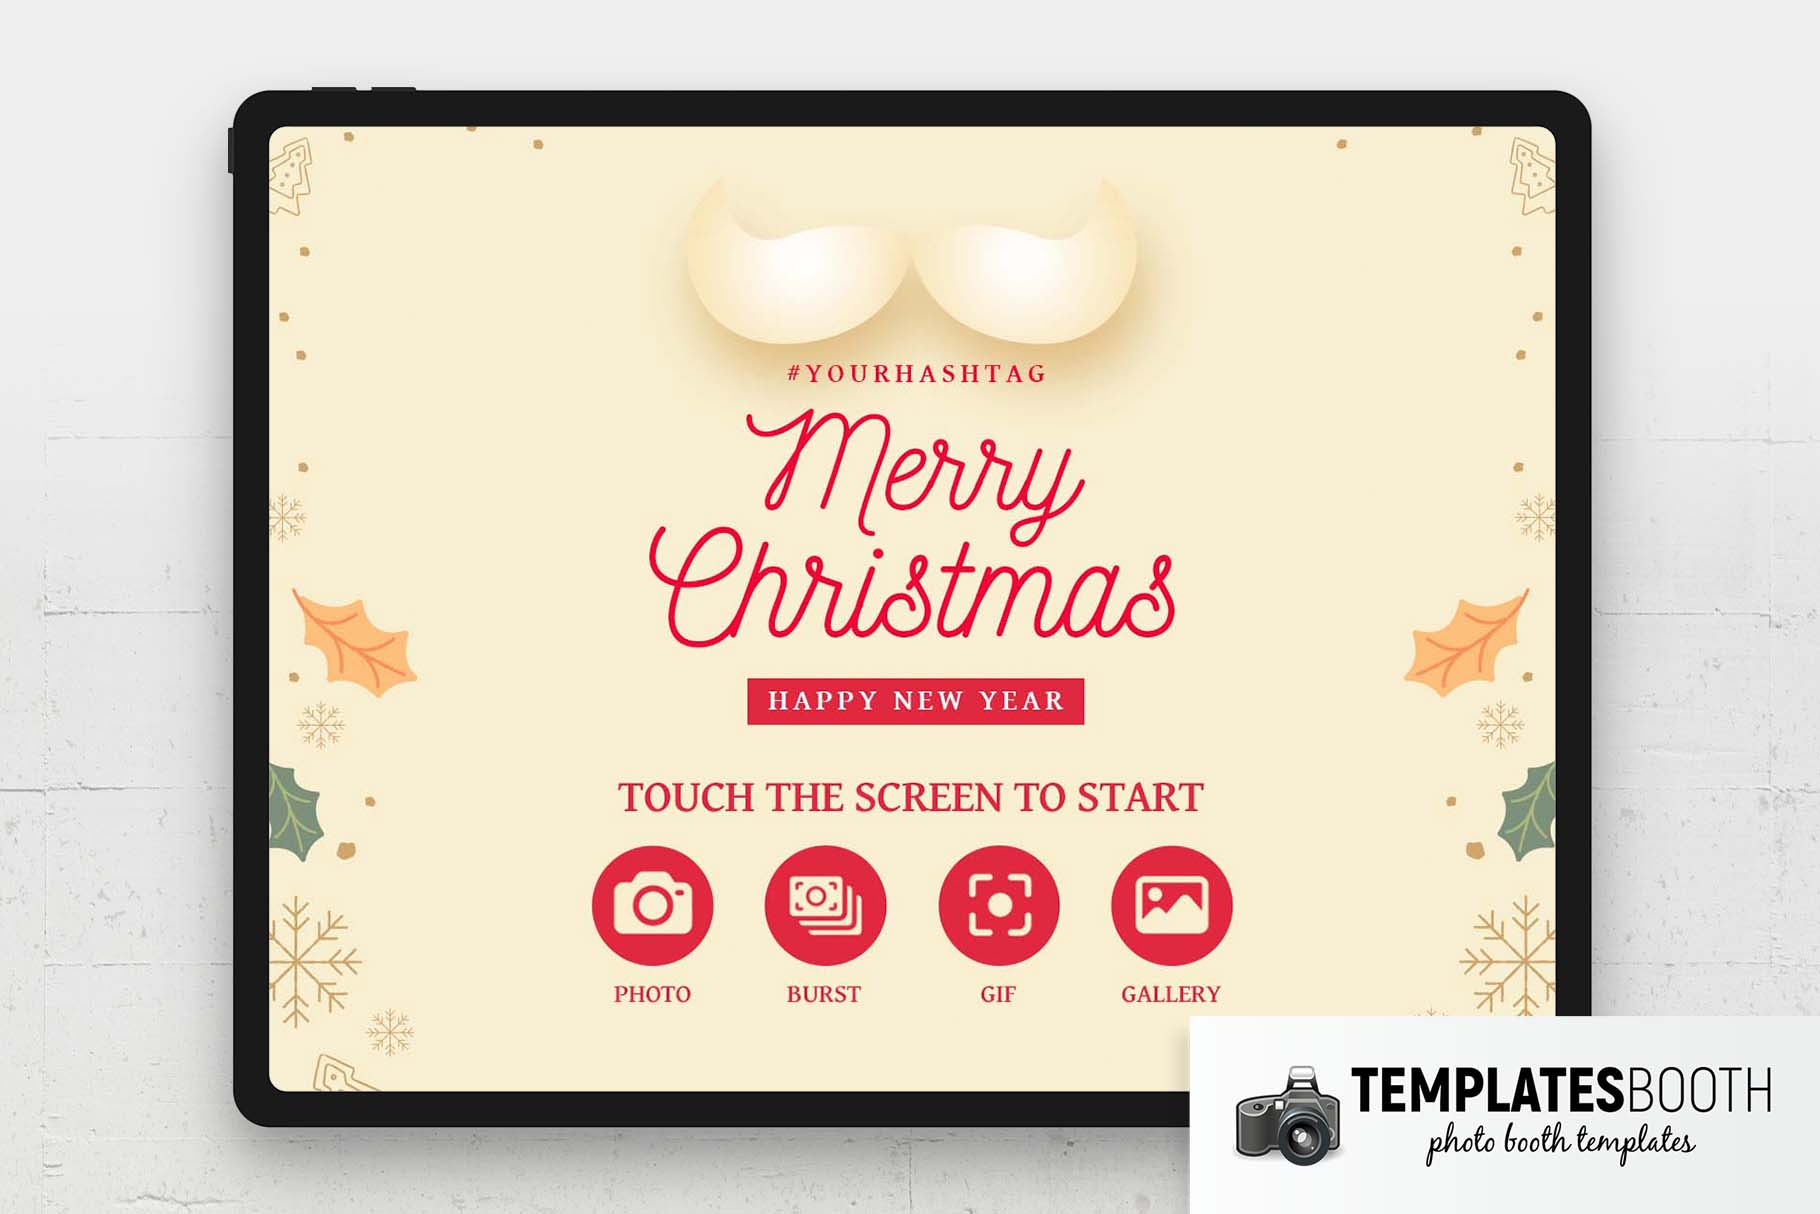 Christmas Party Photo Booth Welcome Screen